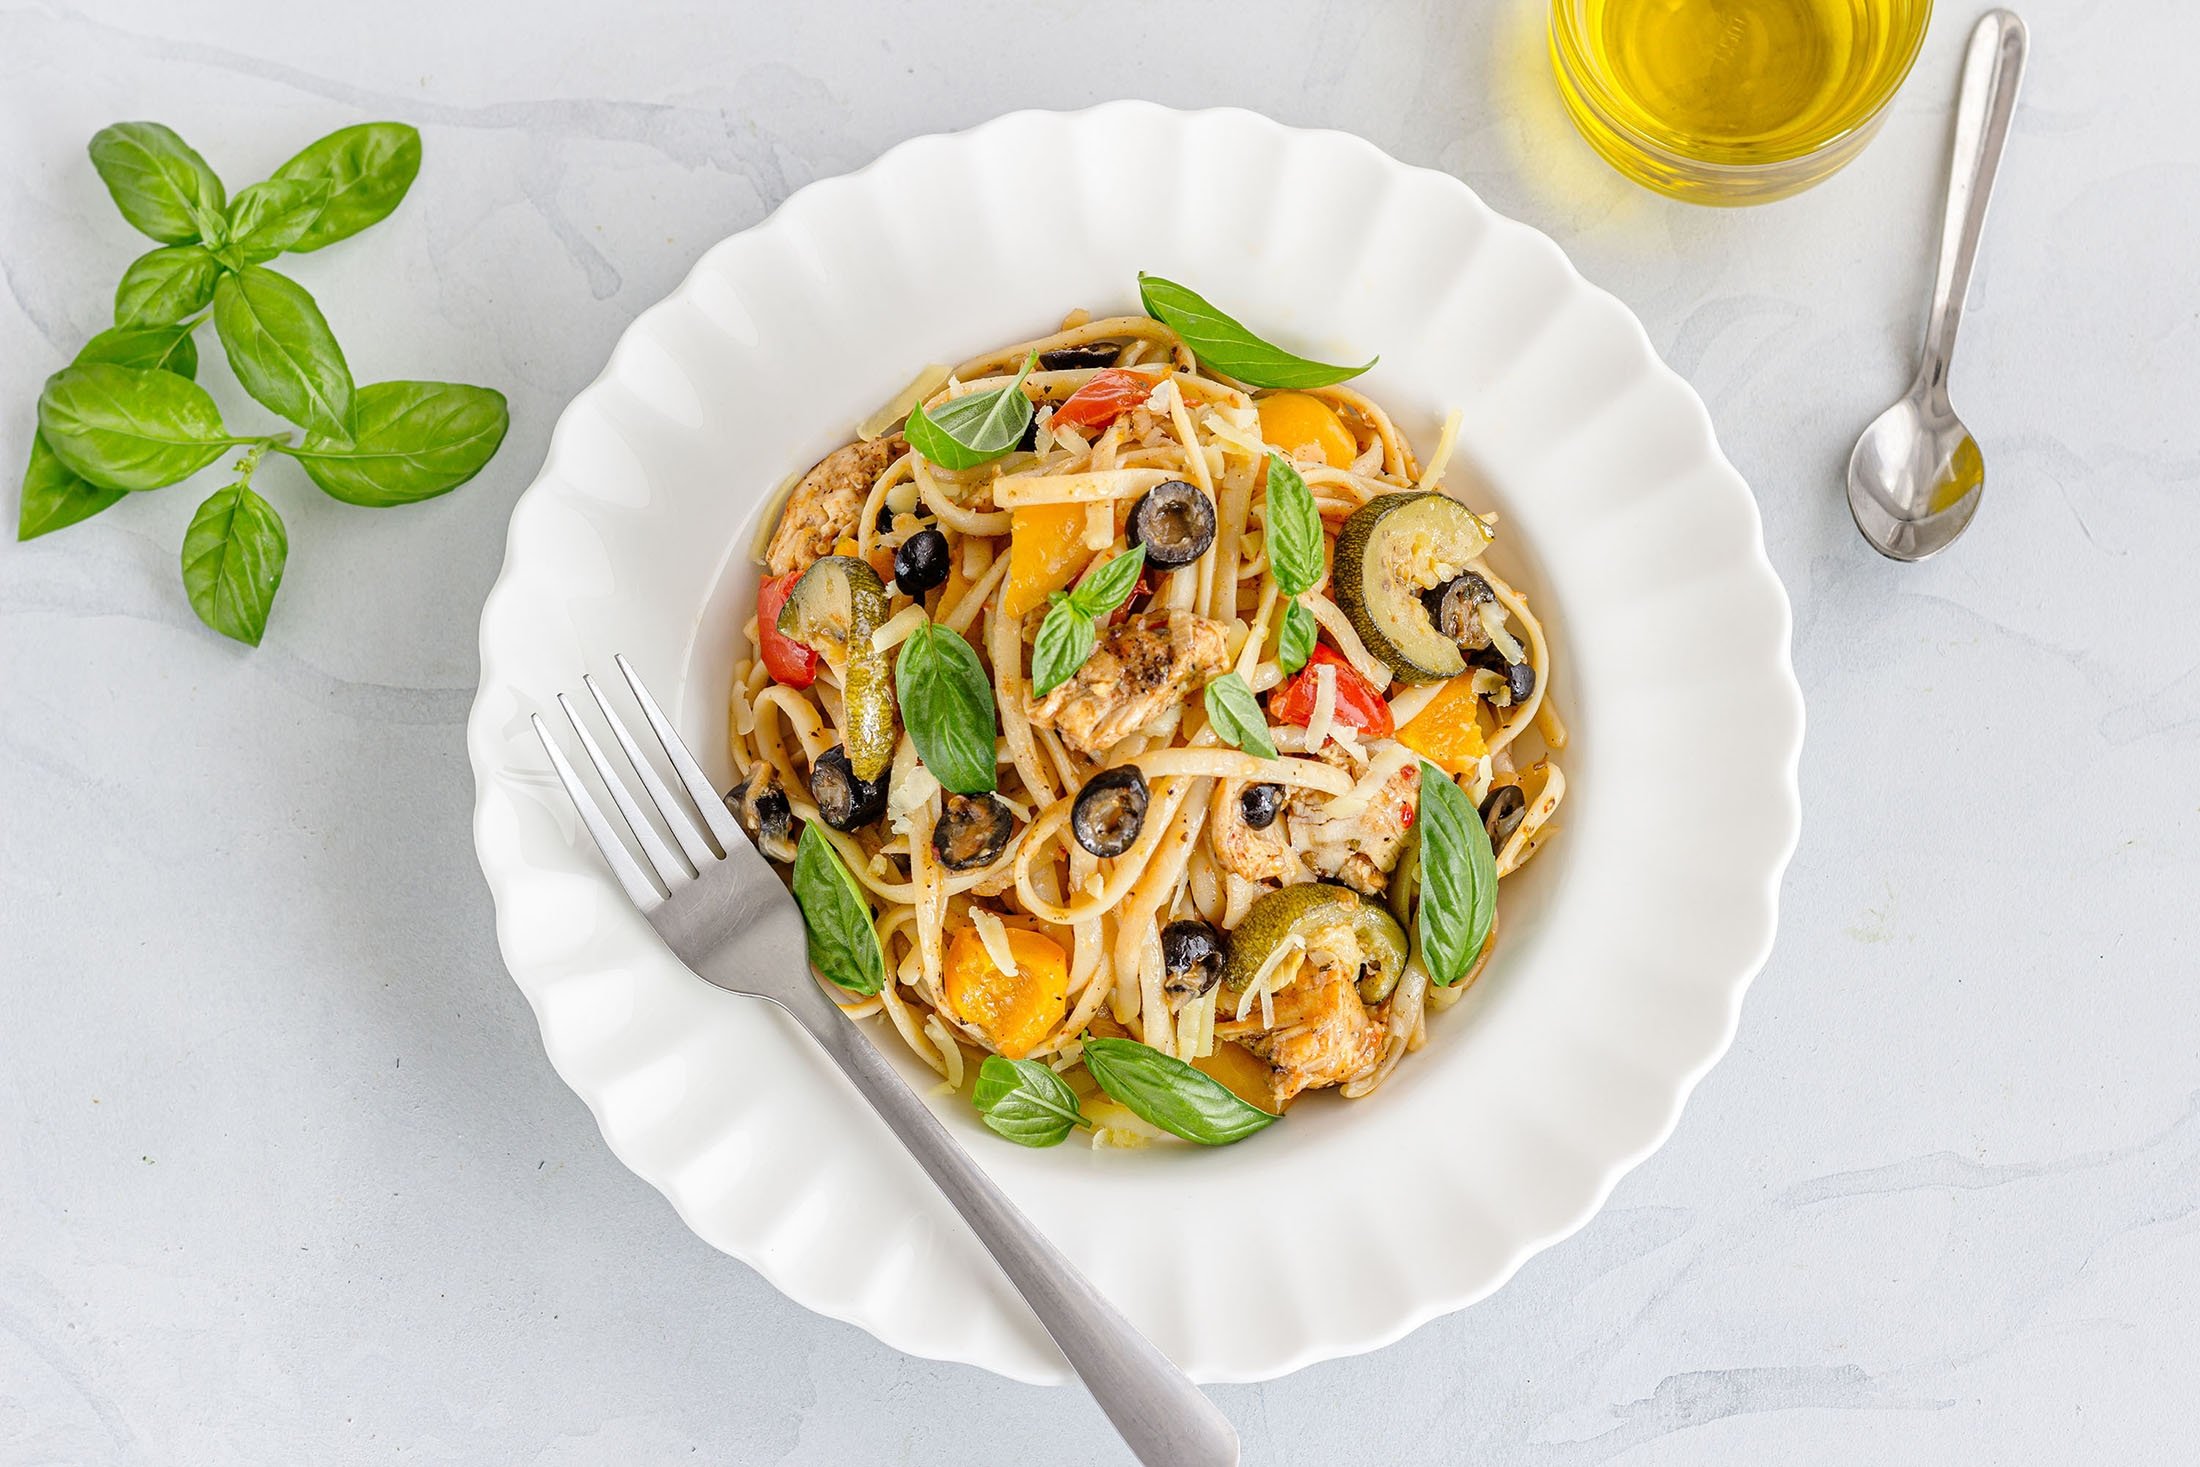 Toss in some leftover chicken and veggies for a quick dinner fix.  (Photo from Shutterstock)